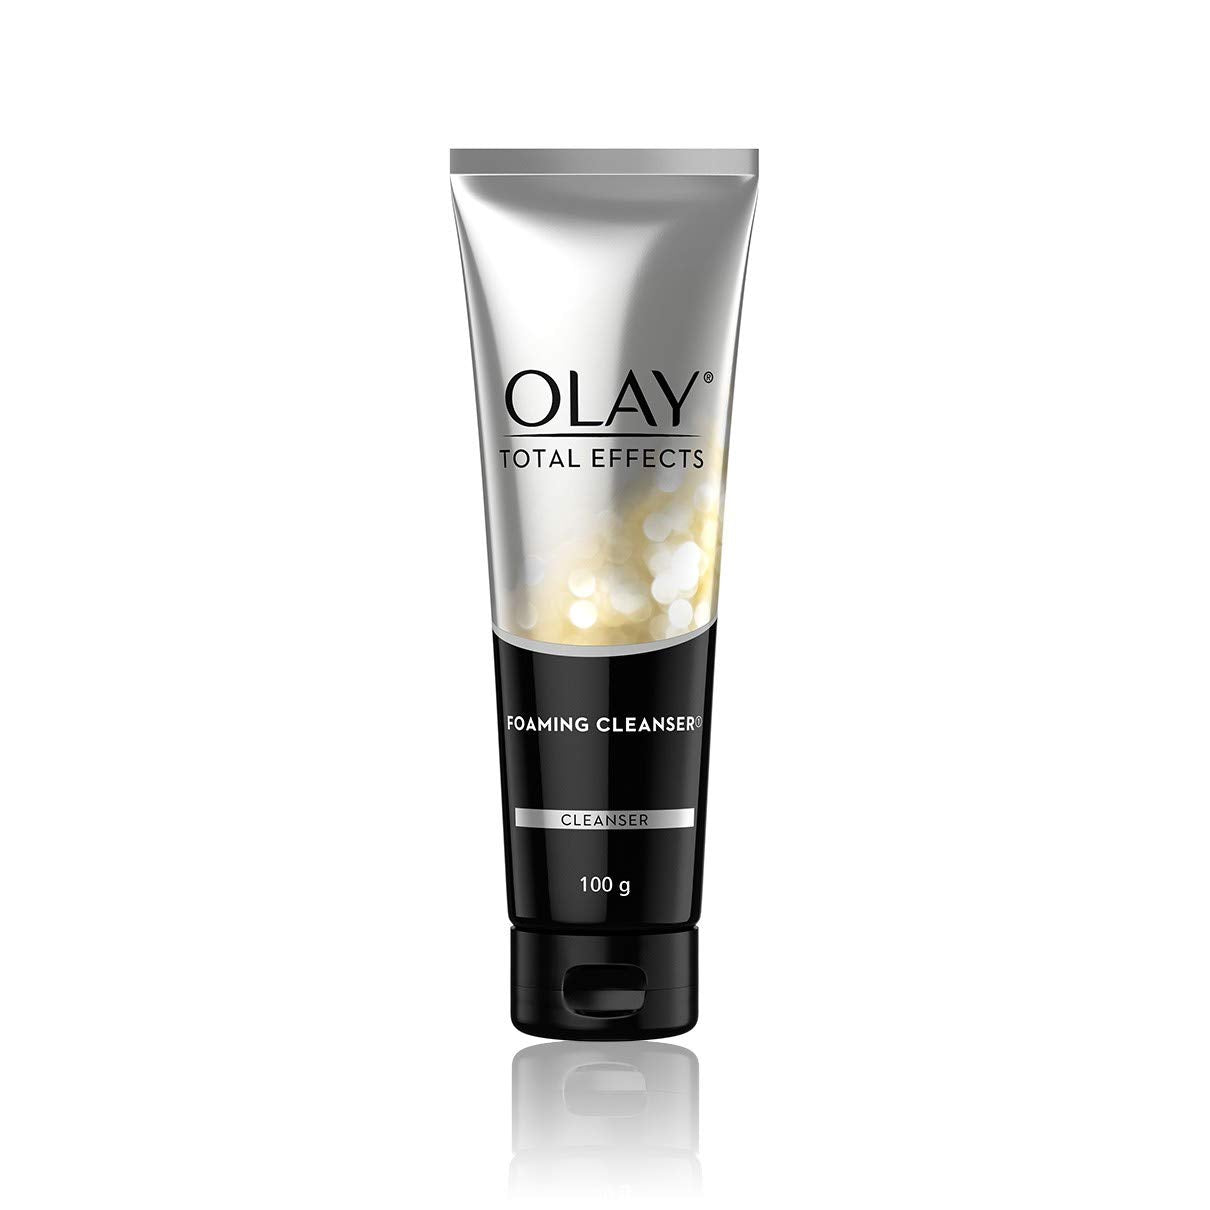 Olay Total Effects 7-in-1 Anti-Aging Foaming Cleanser : 100g